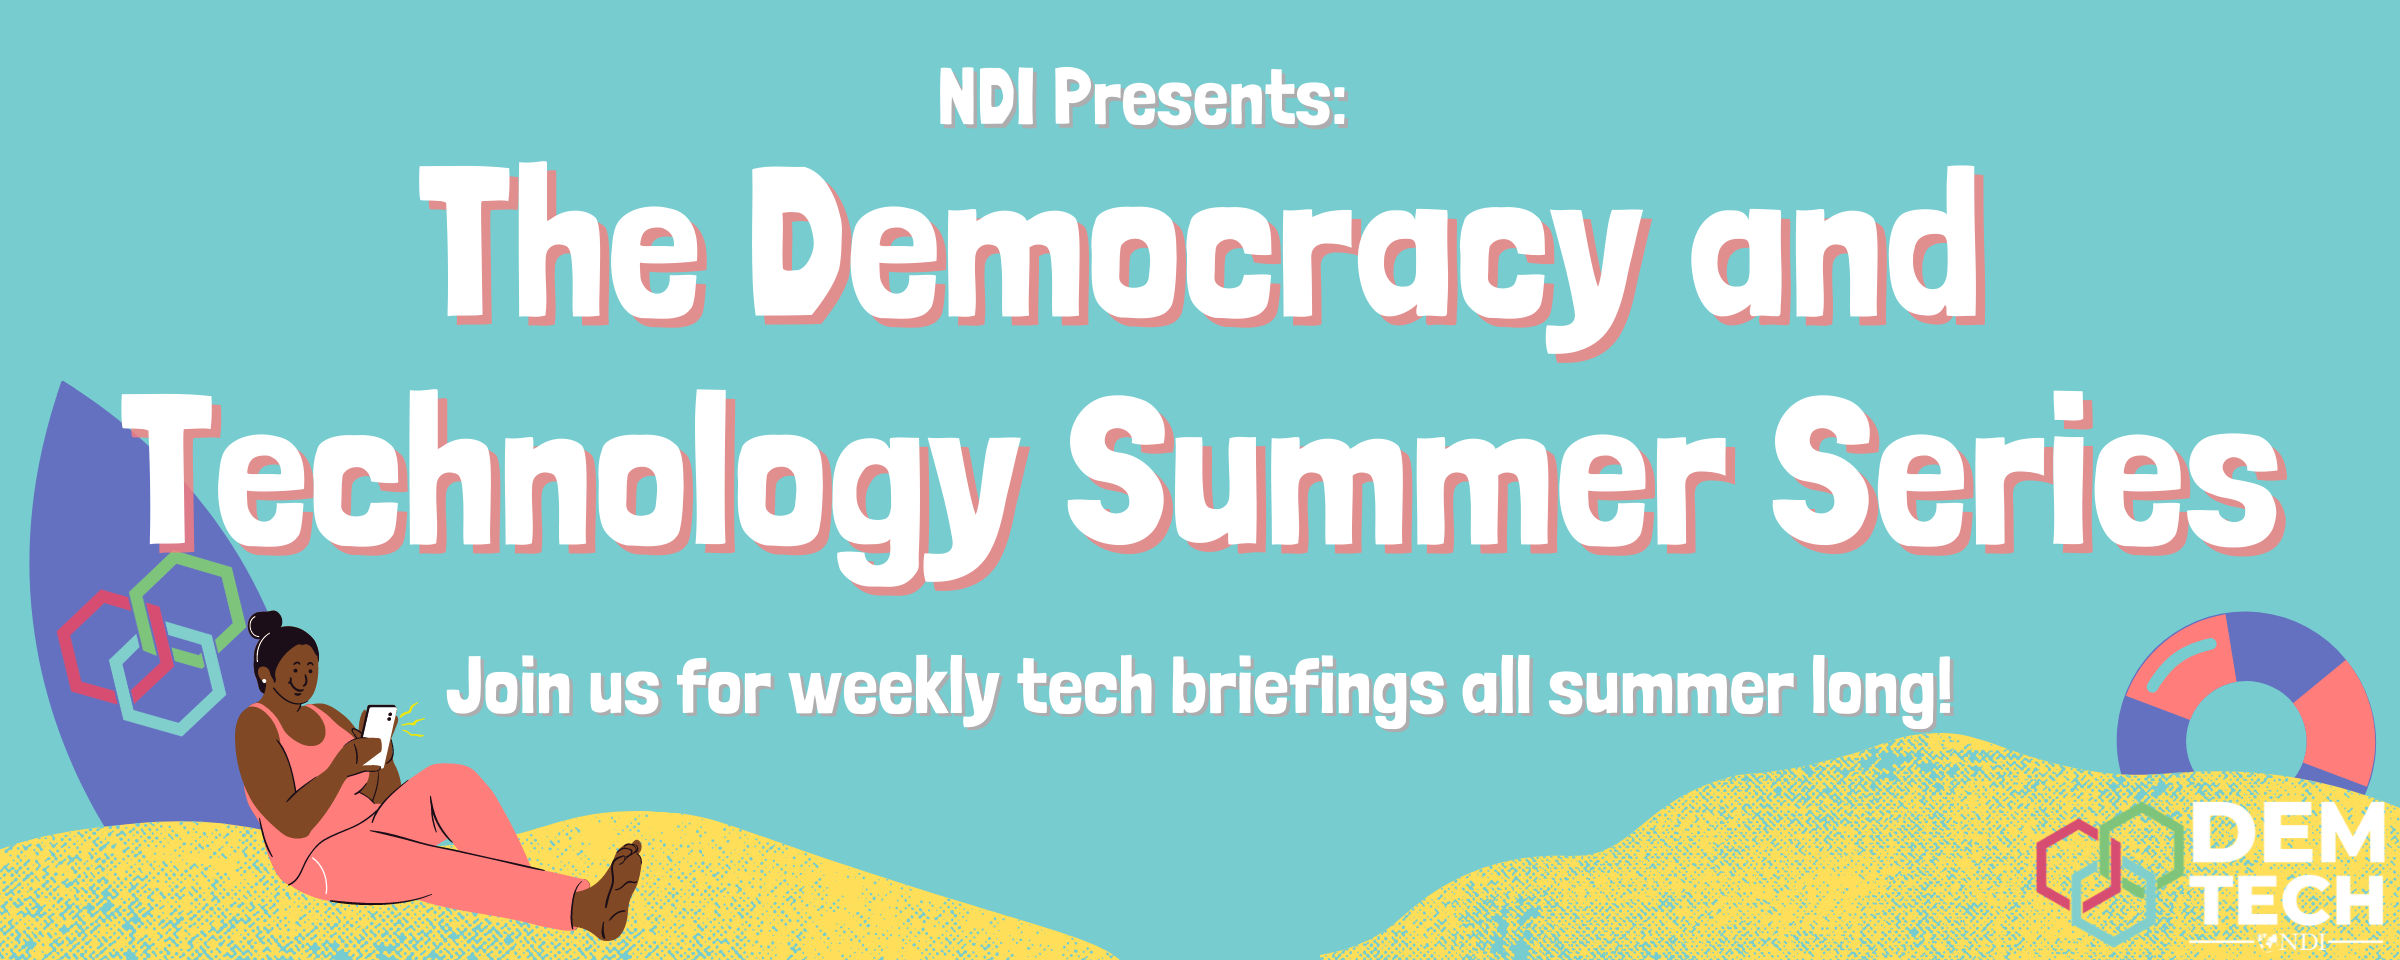 NDI Presents: The Democracy and Technology Summer Series. Join us for a series of weekly tech briefings all summer long!